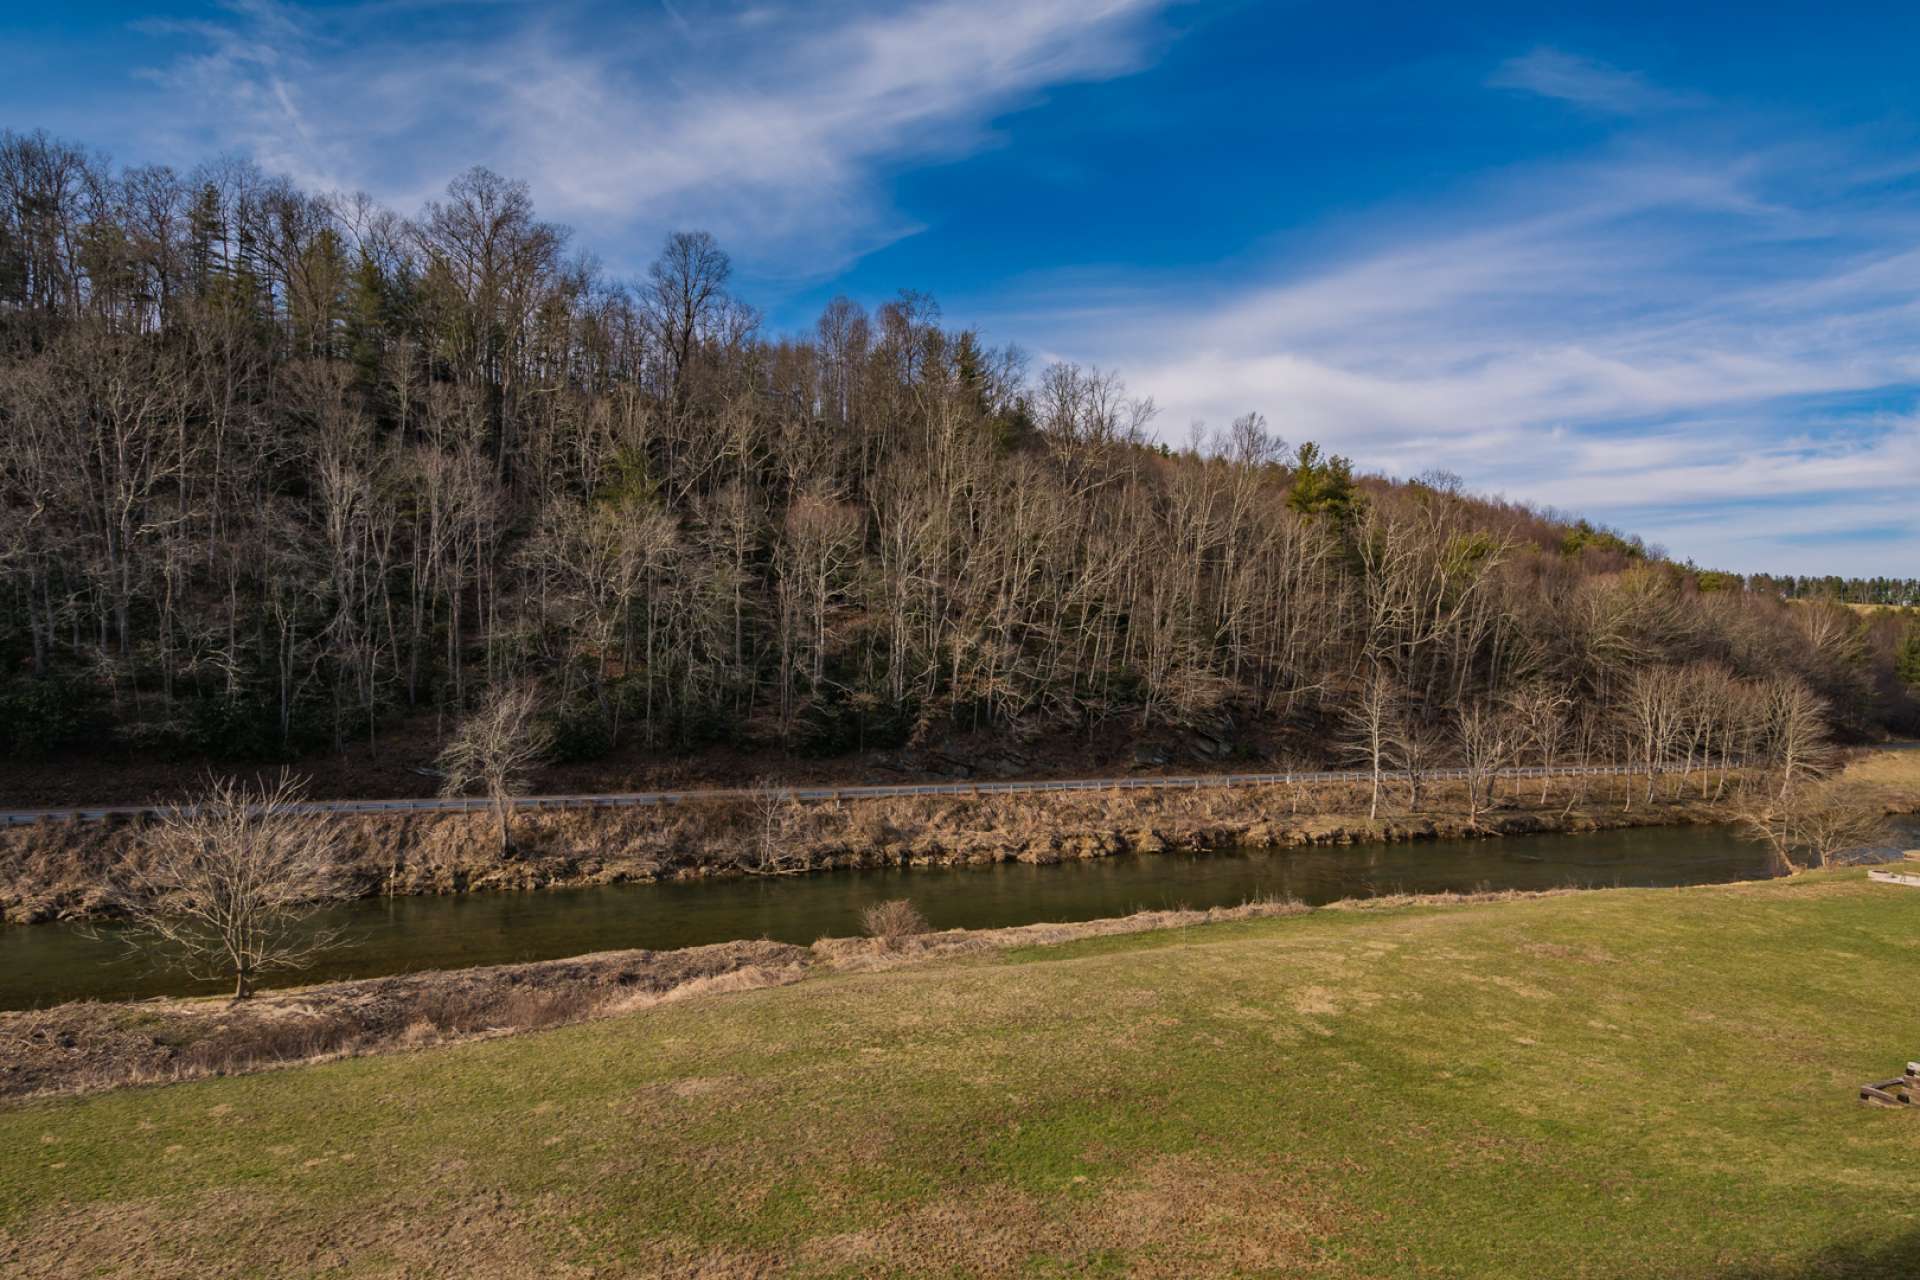 You will also enjoy the popular scenic biking trail along Railroad Grade Road and the New River.  Notice the easy access into the river for fishing, kayaking and tubing. A combination of lots 17 and 18 provides a beautiful 2.25 acre setting with plenty of nice river frontage for outdoor play.